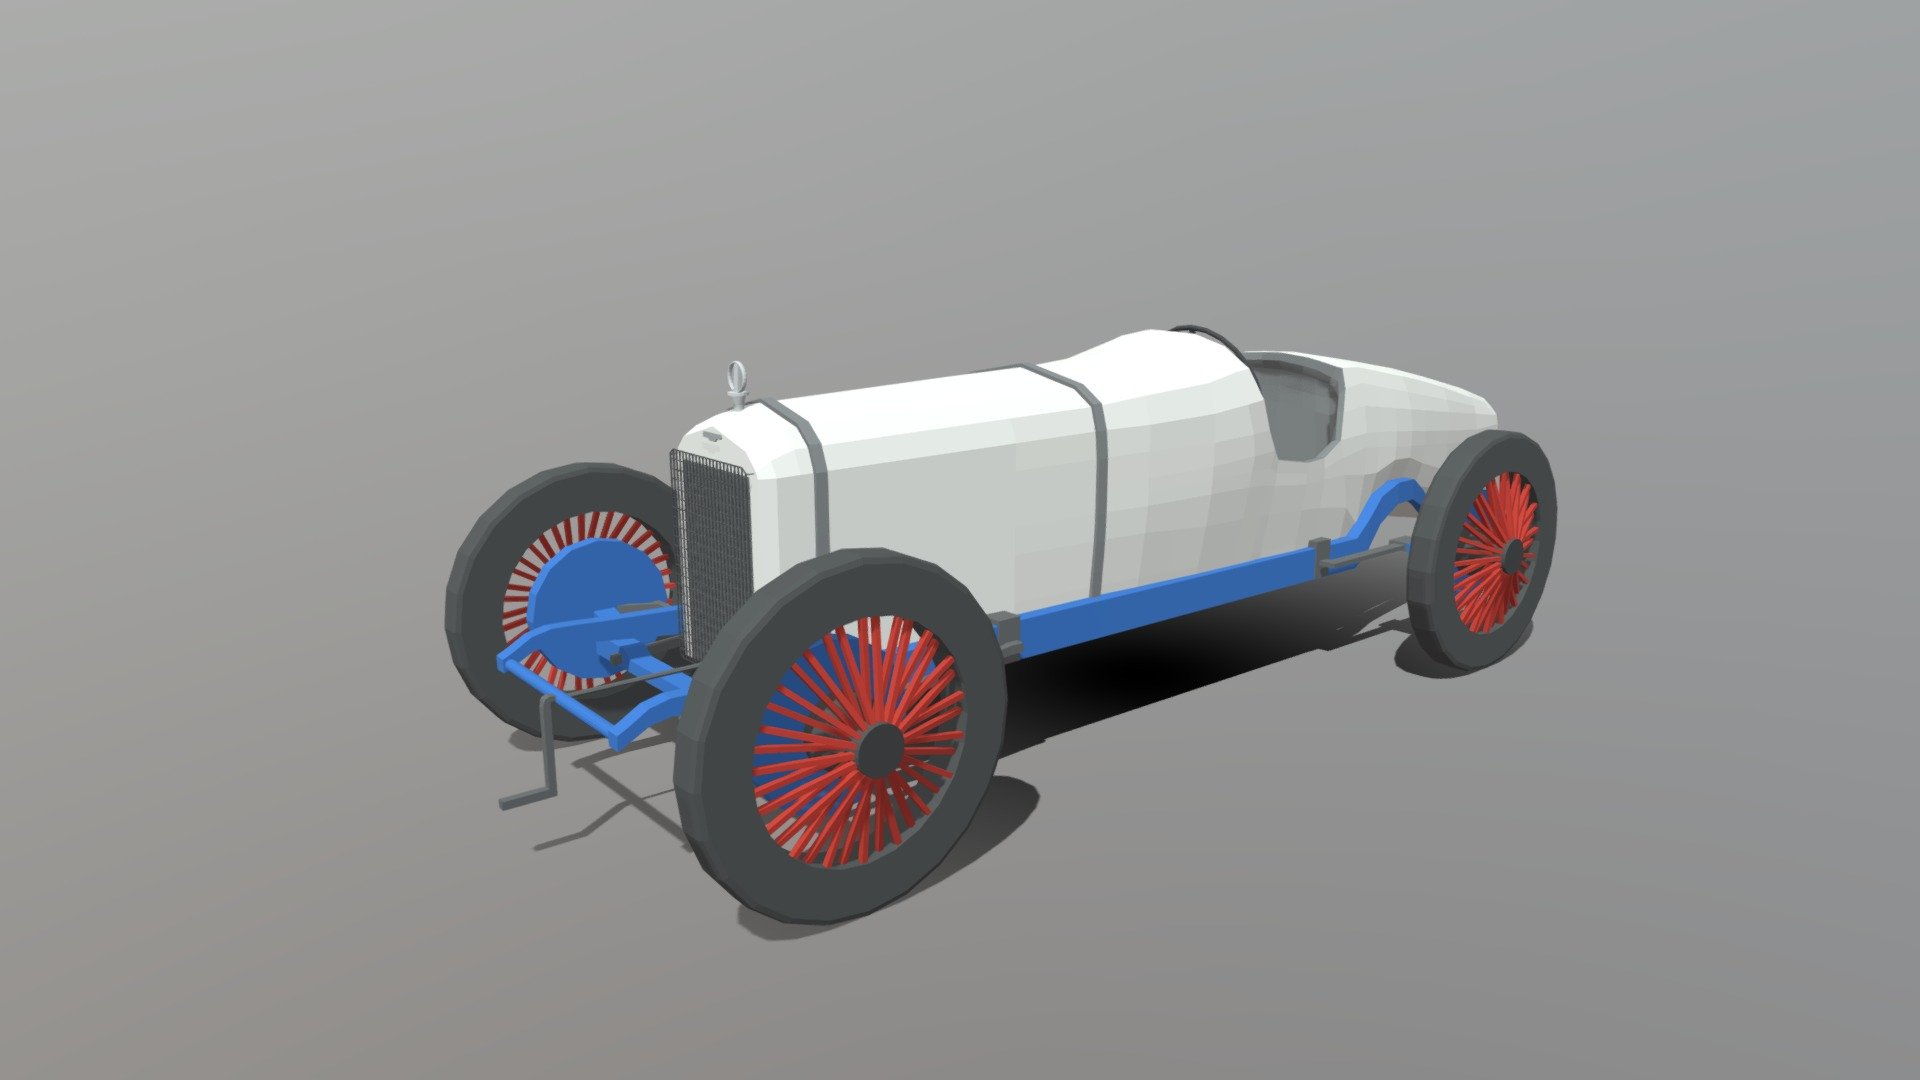 This is a low poly 3d model of a Duesenberg 3 Litre GP 1921 car. The low poly car was modelled and prepared for low-poly style renderings, background, general CG visualization presented as a mesh with quads only.

Verts : 8.773 Faces: 9.235

The model have simple materials with diffuse colors.

No ring, maps and no UVW mapping is available.

The original file was created in blender. You will receive a 3DS, OBJ, FBX, blend, DAE, Stl.

All preview images were rendered with Blender Cycles. Product is ready to render out-of-the-box. Please note that the lights, cameras, and background is only included in the .blend file. The model is clean and alone in the other provided files, centred at origin and has real-world scale 3d model